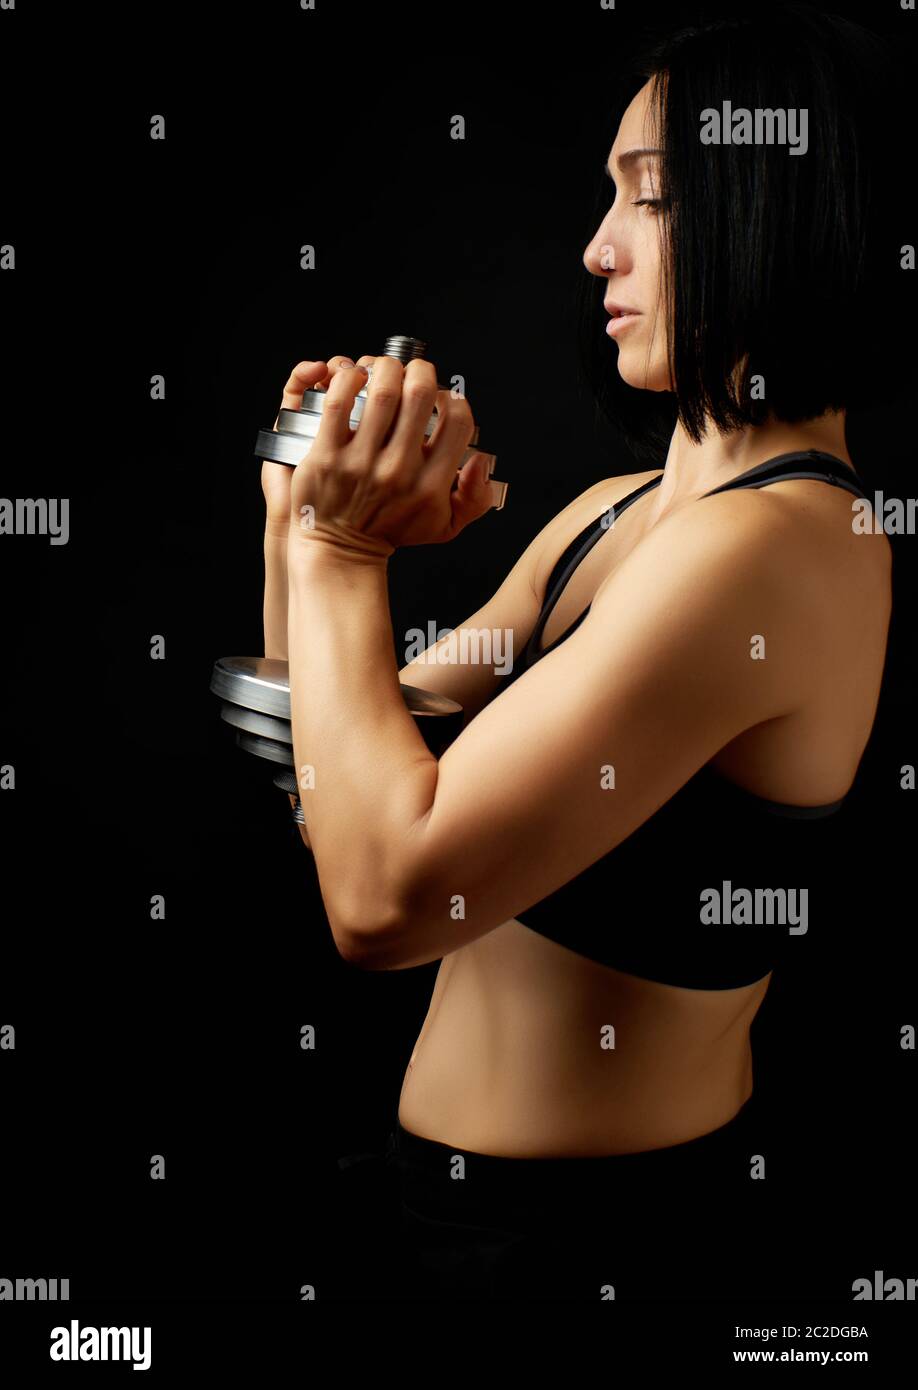 https://c8.alamy.com/comp/2C2DGBA/young-woman-of-caucasian-appearance-holds-steel-type-setting-dumbbells-in-her-hands-sports-training-dark-background-2C2DGBA.jpg